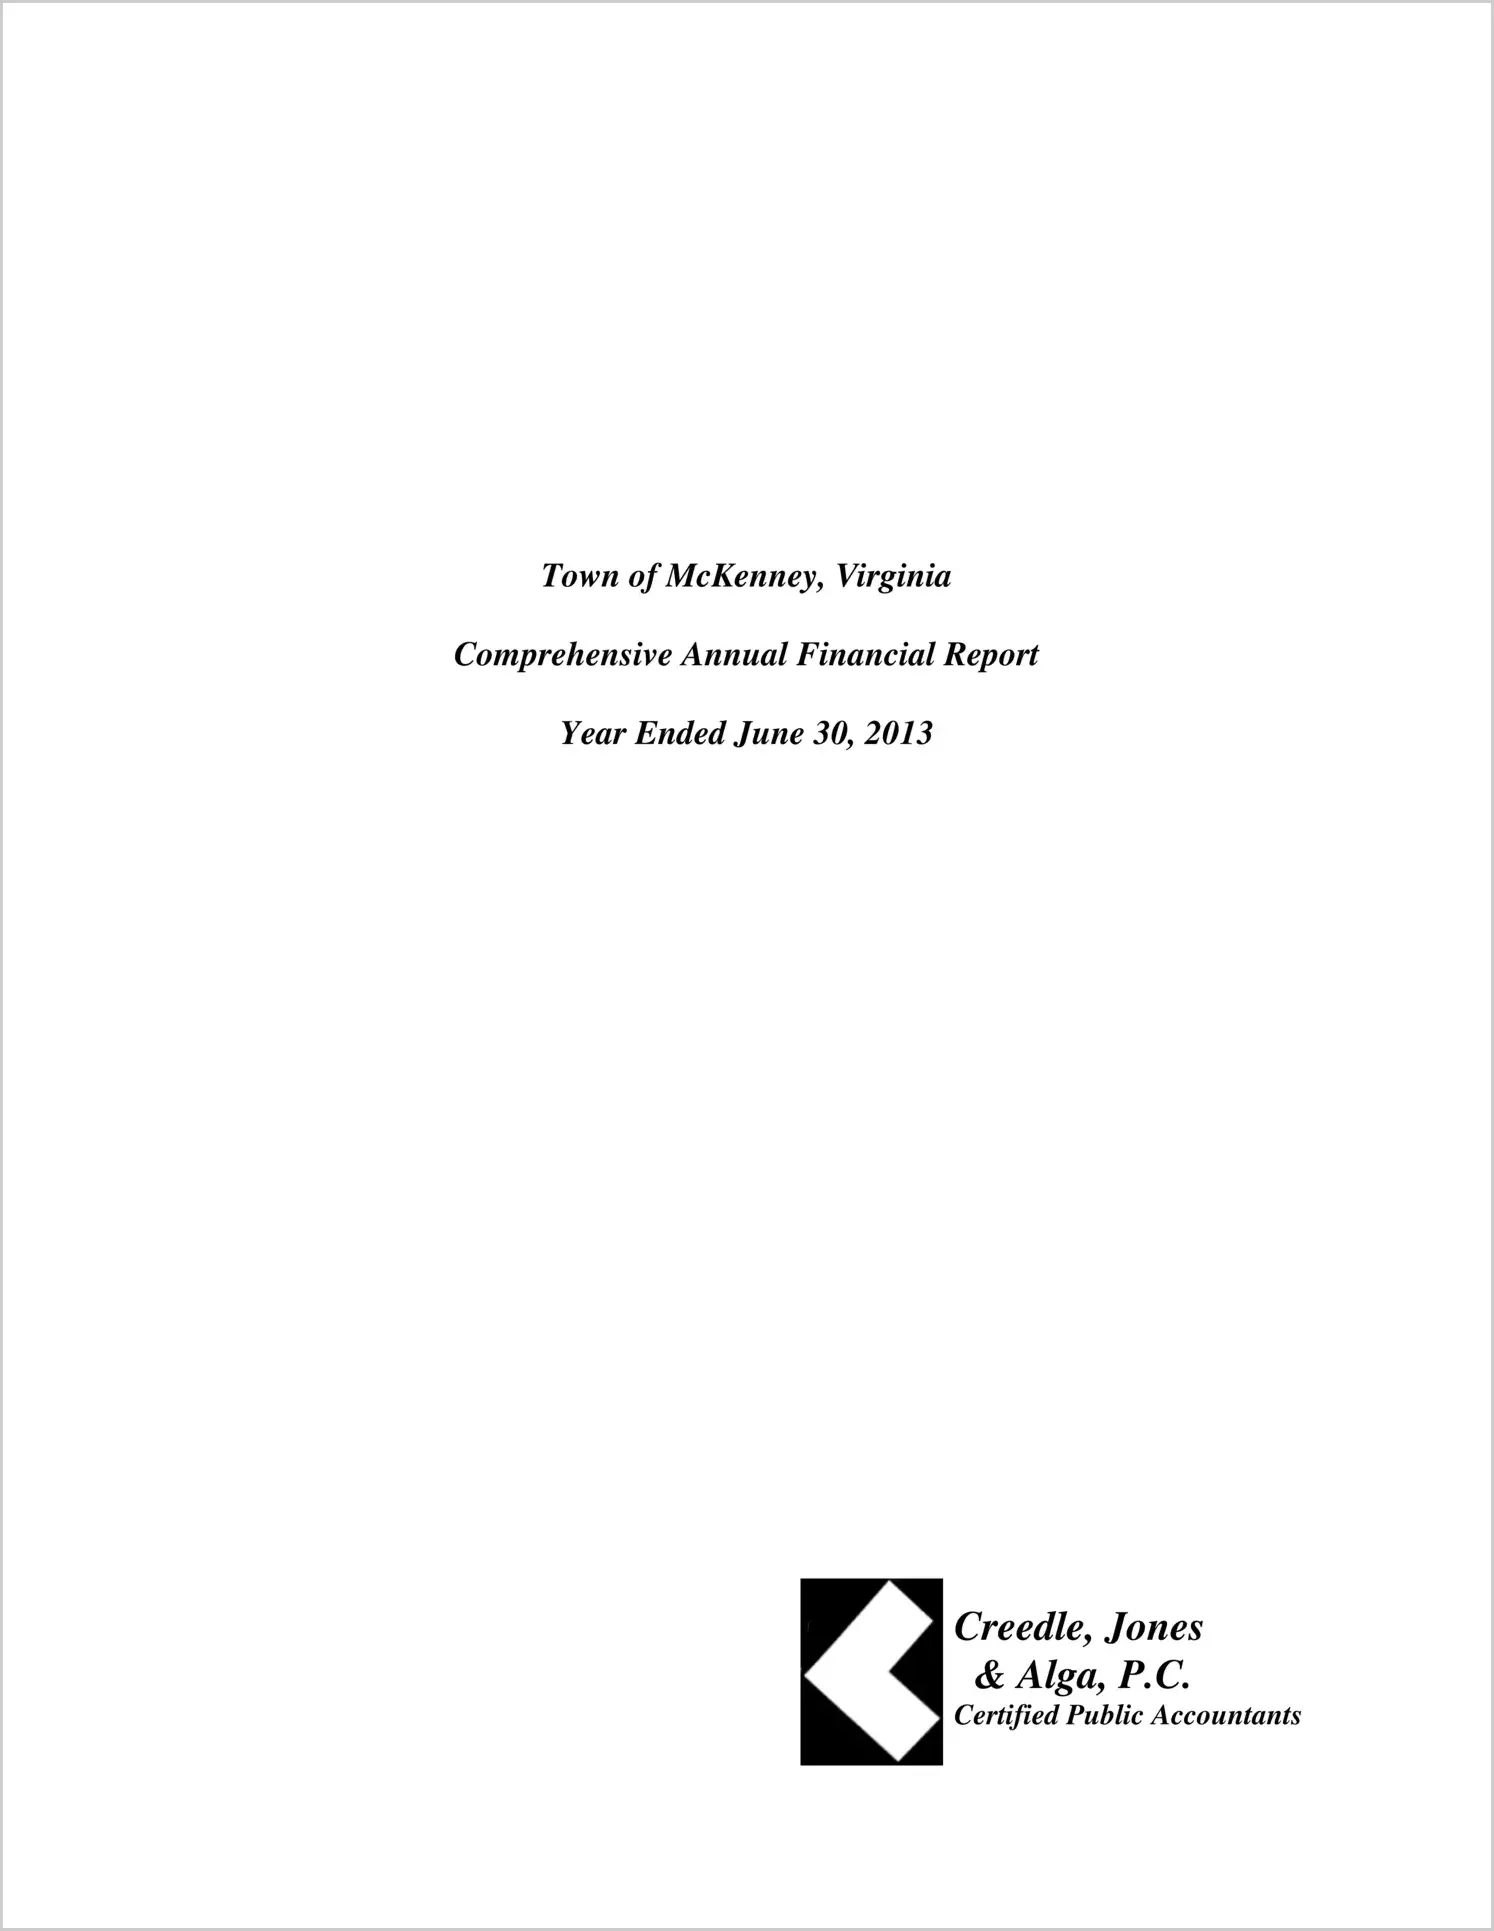 2013 Annual Financial Report for Town of McKenney